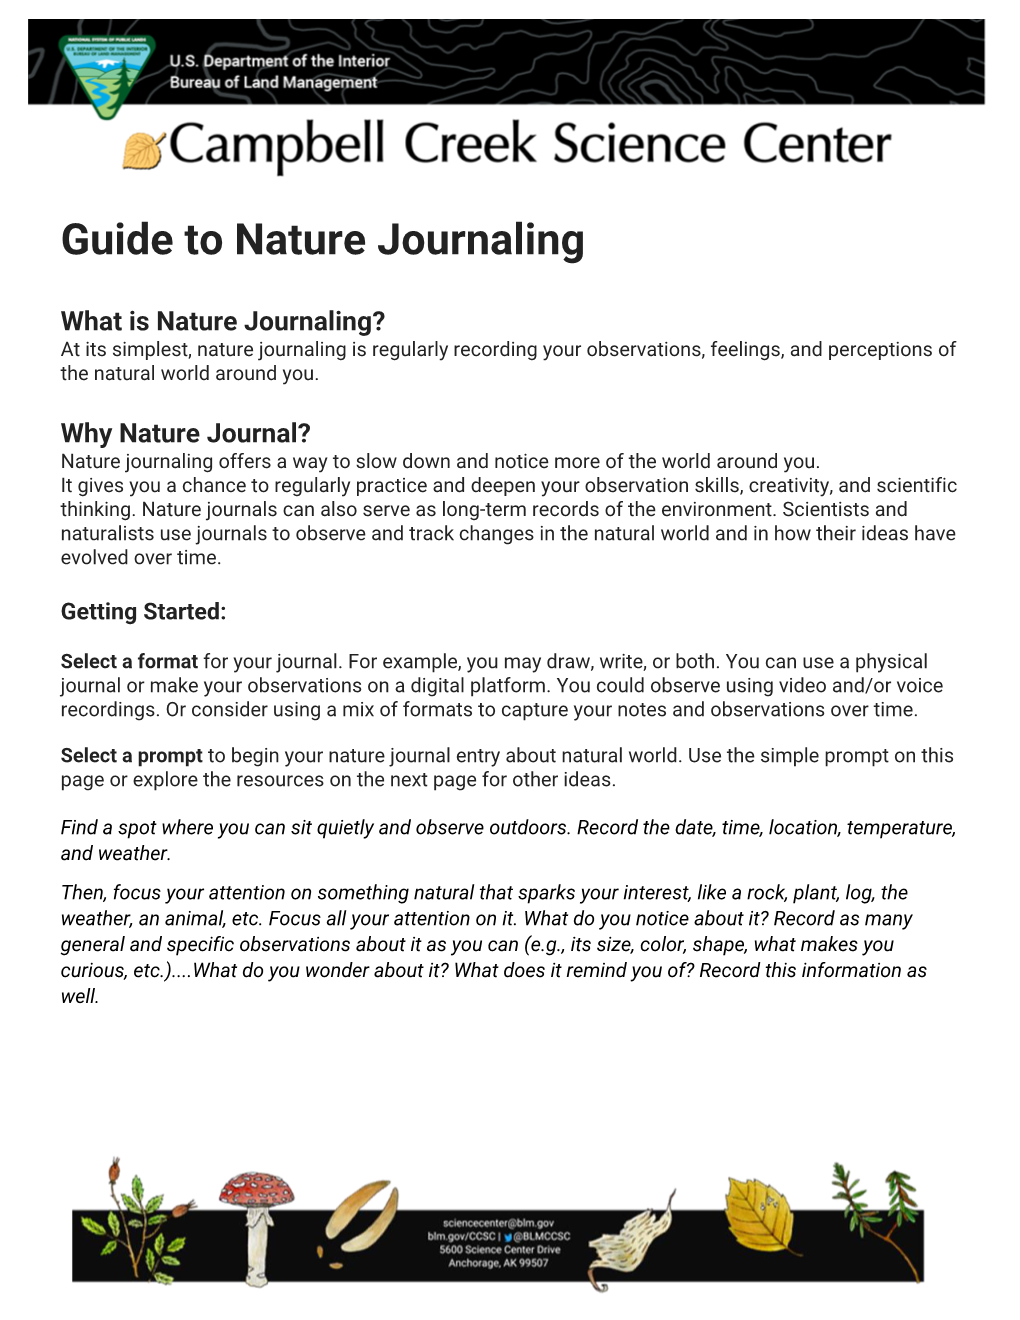 Guide to Nature Journaling